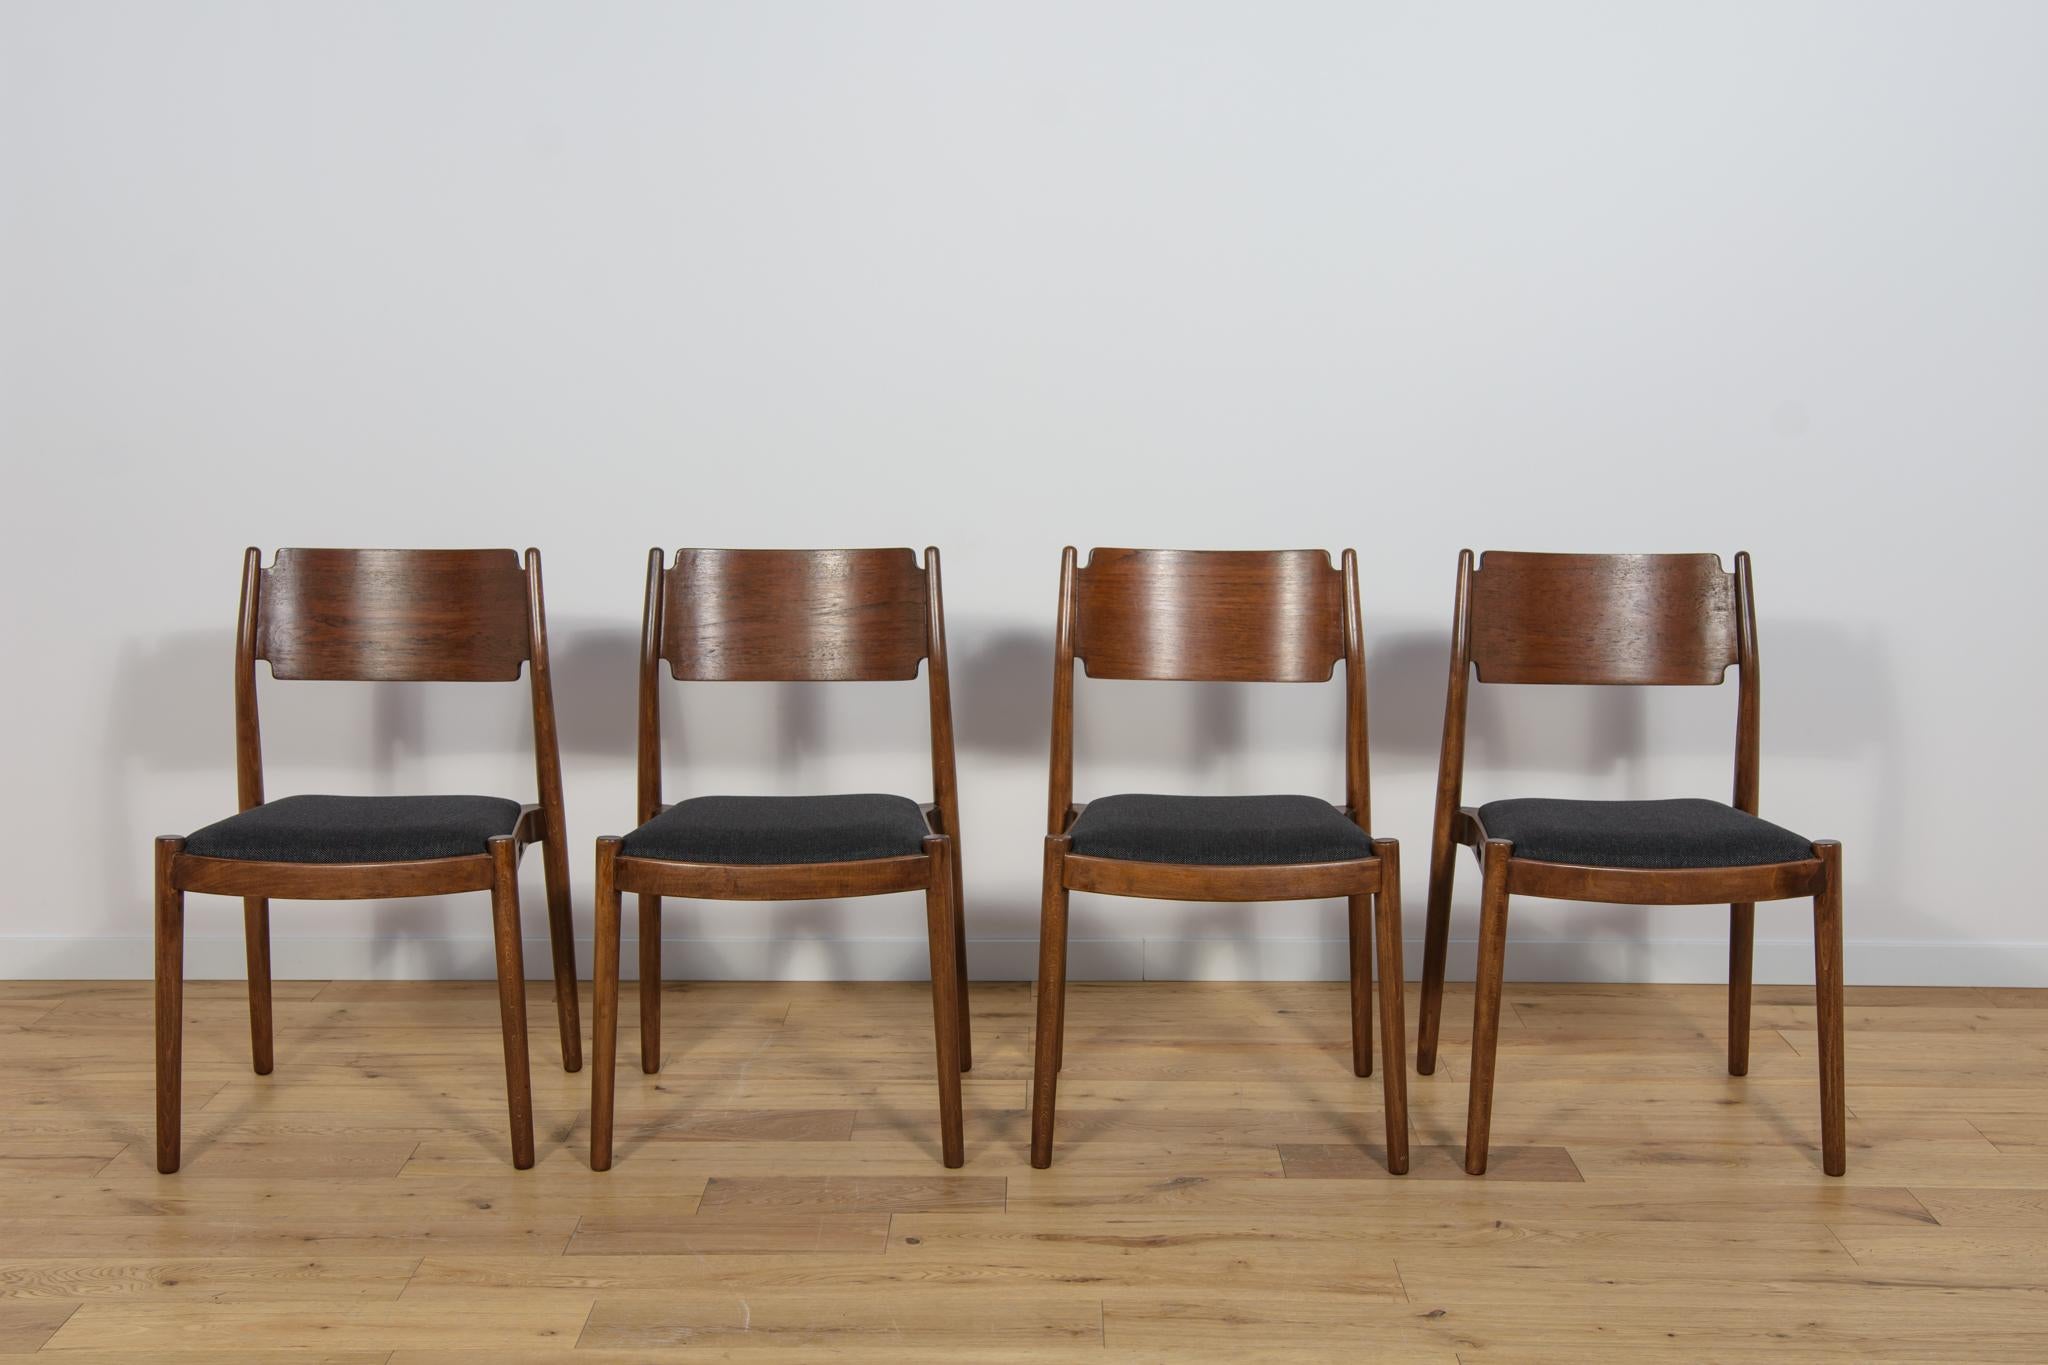 The set of four chairs was produced in Denmark in the 1960s. The chairs were made of beech wood. The furniture has been thoroughly renovated, cleaned of old coatings, stained with rosewood stain, and finished with a strong semi-matt varnish.